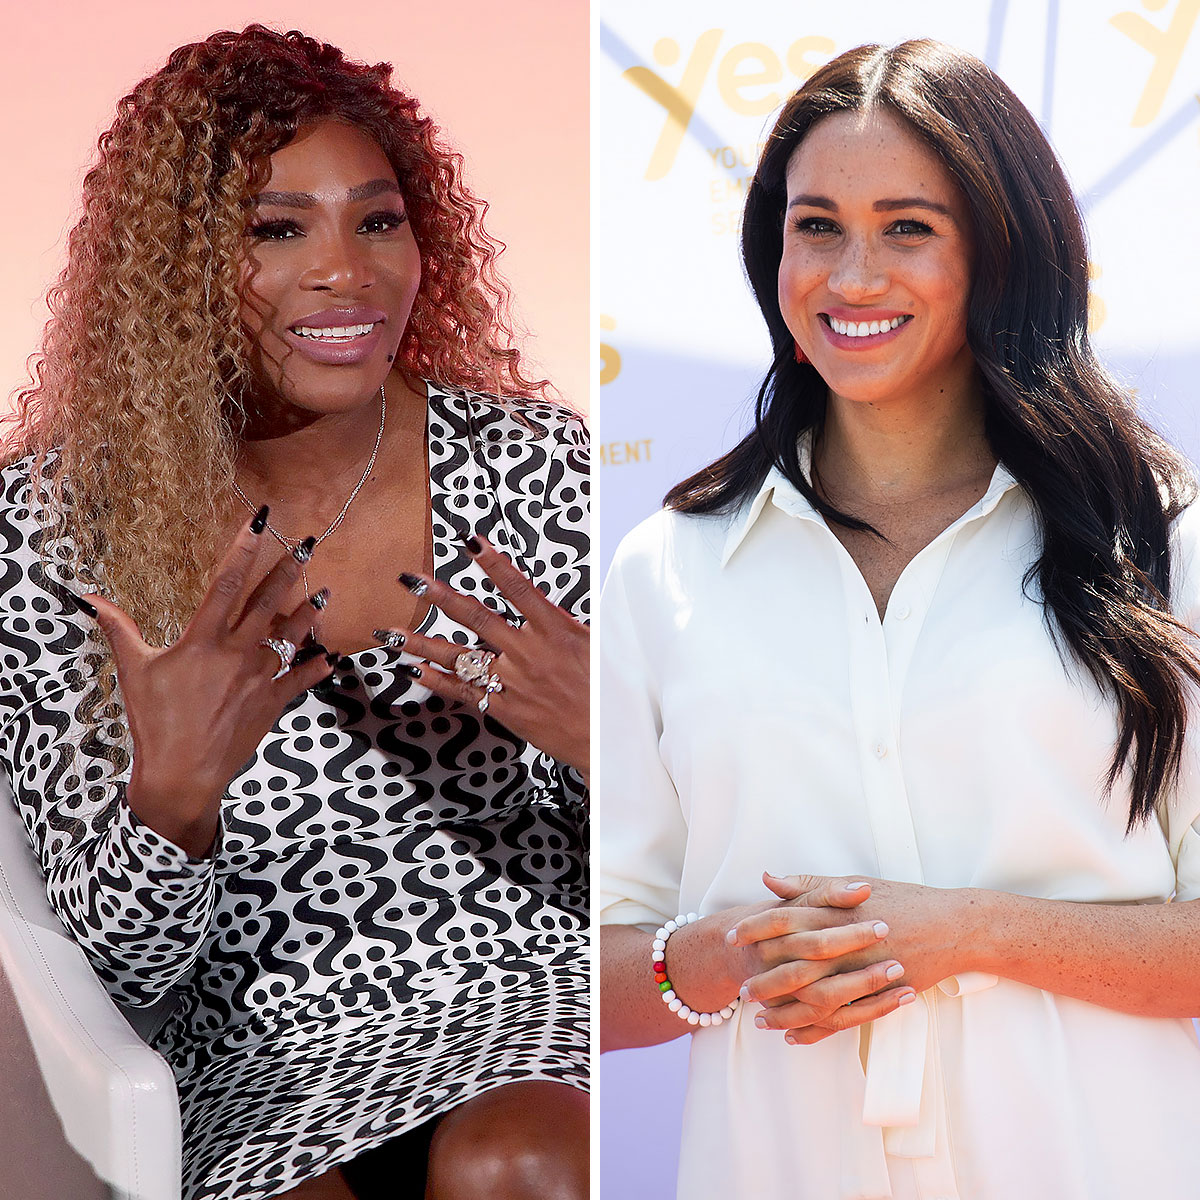 Meghan Markle and Serena Williams Sweetest Quotes About Their Friendship Always-There